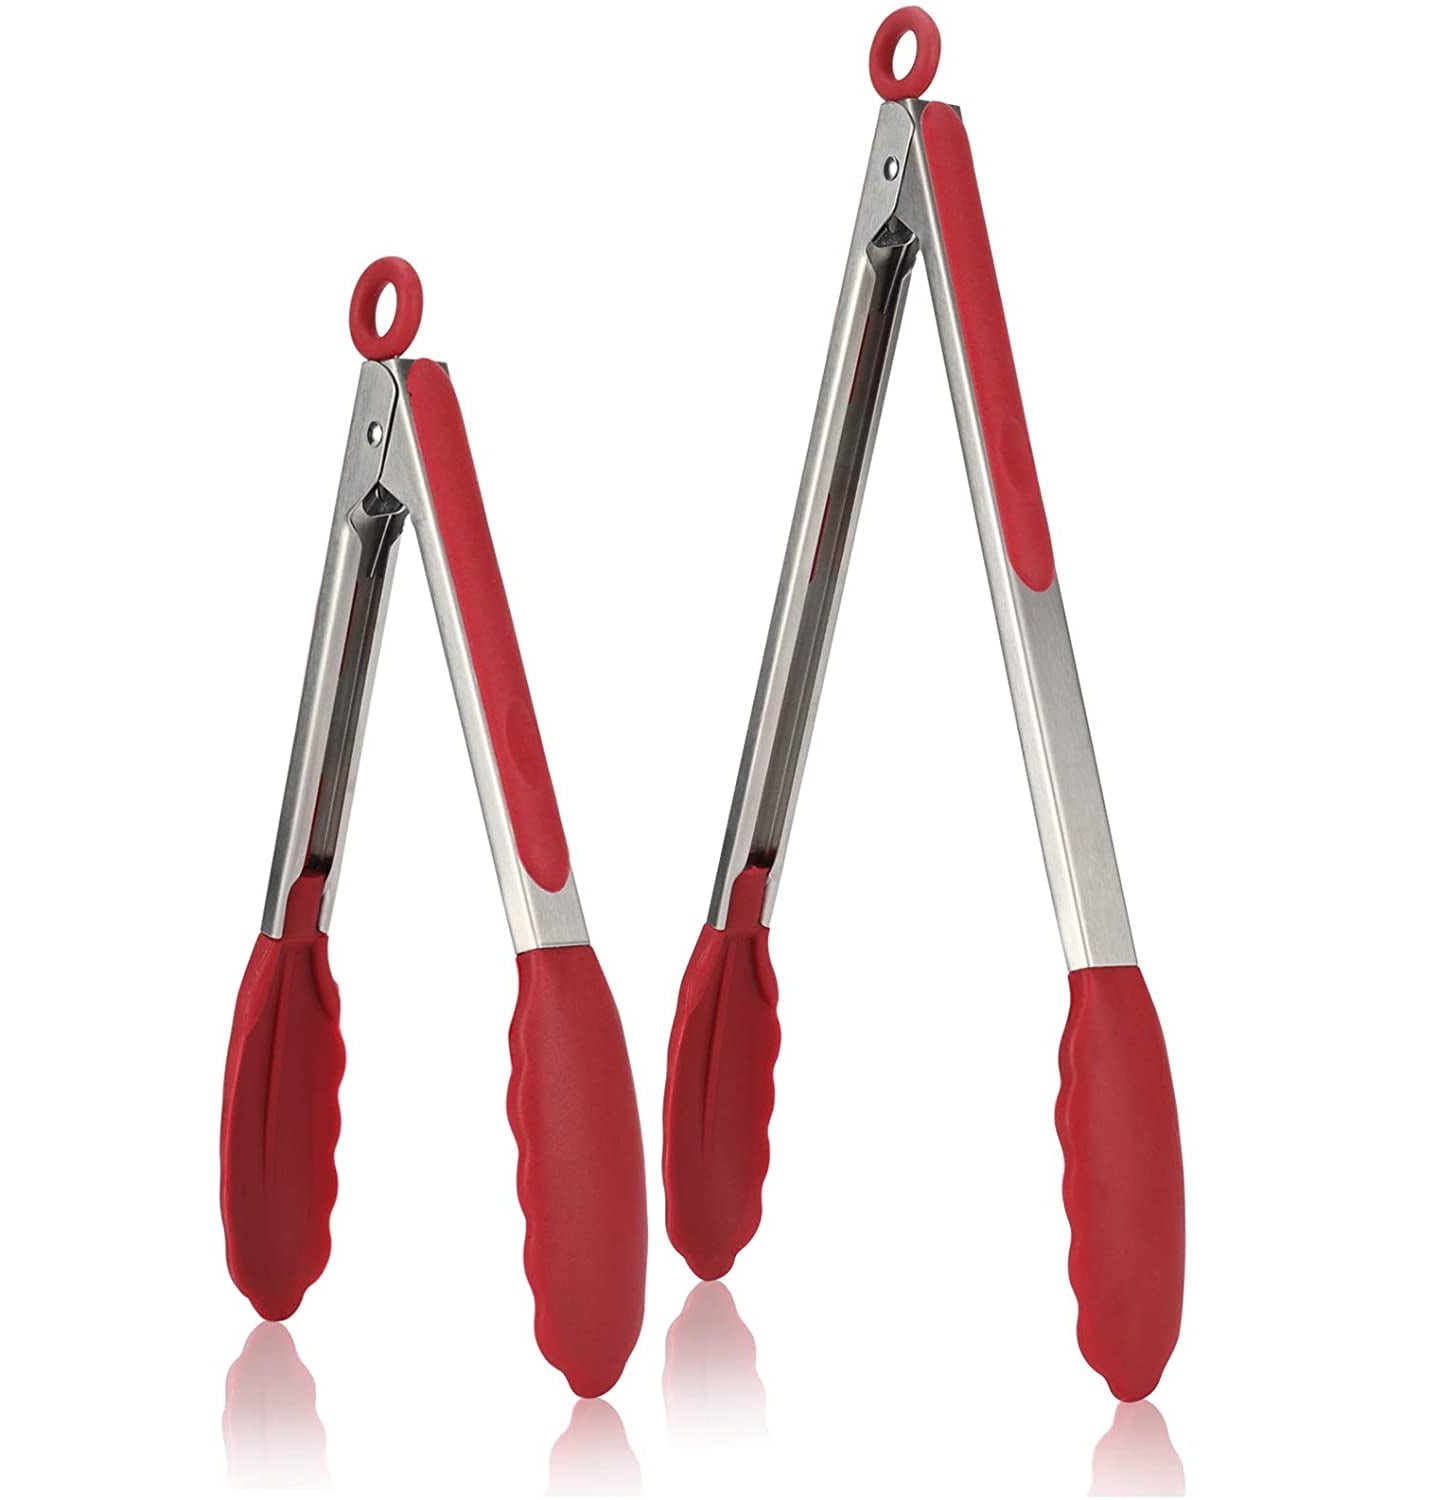 Weftnom kitchen tongs silicone cooking tongs:2 pack cooking kitchen tongs  with silicone tips stainless steel